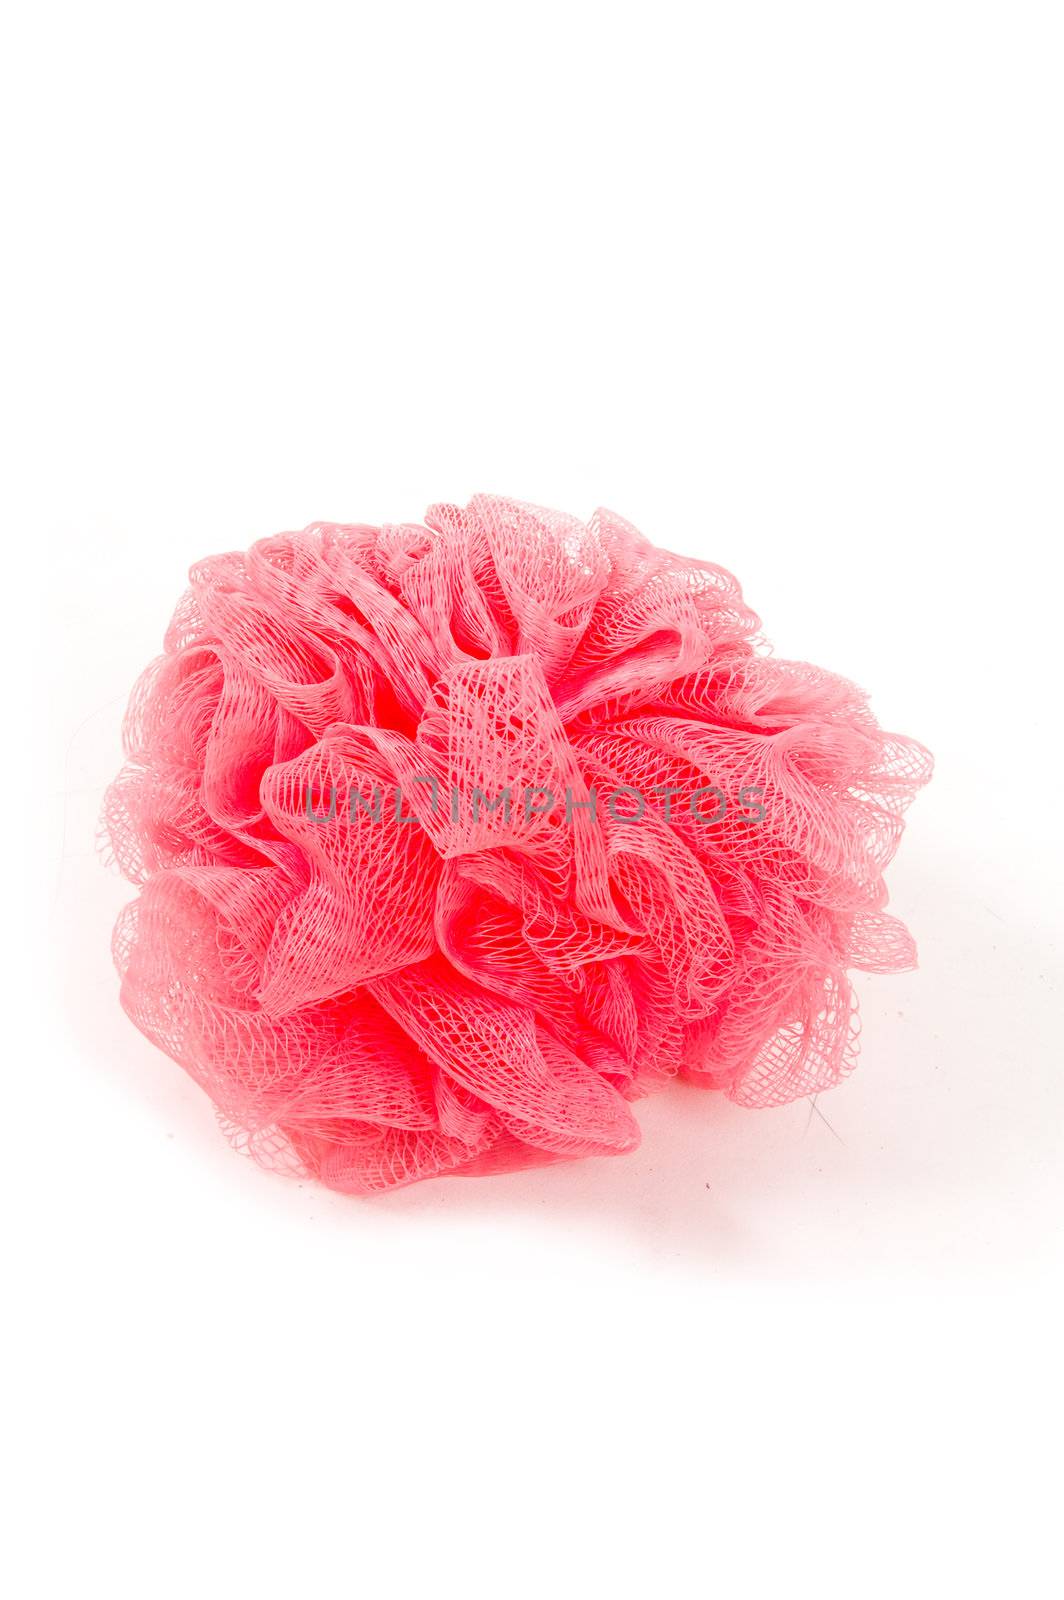 red bath scrub isolated on a white background